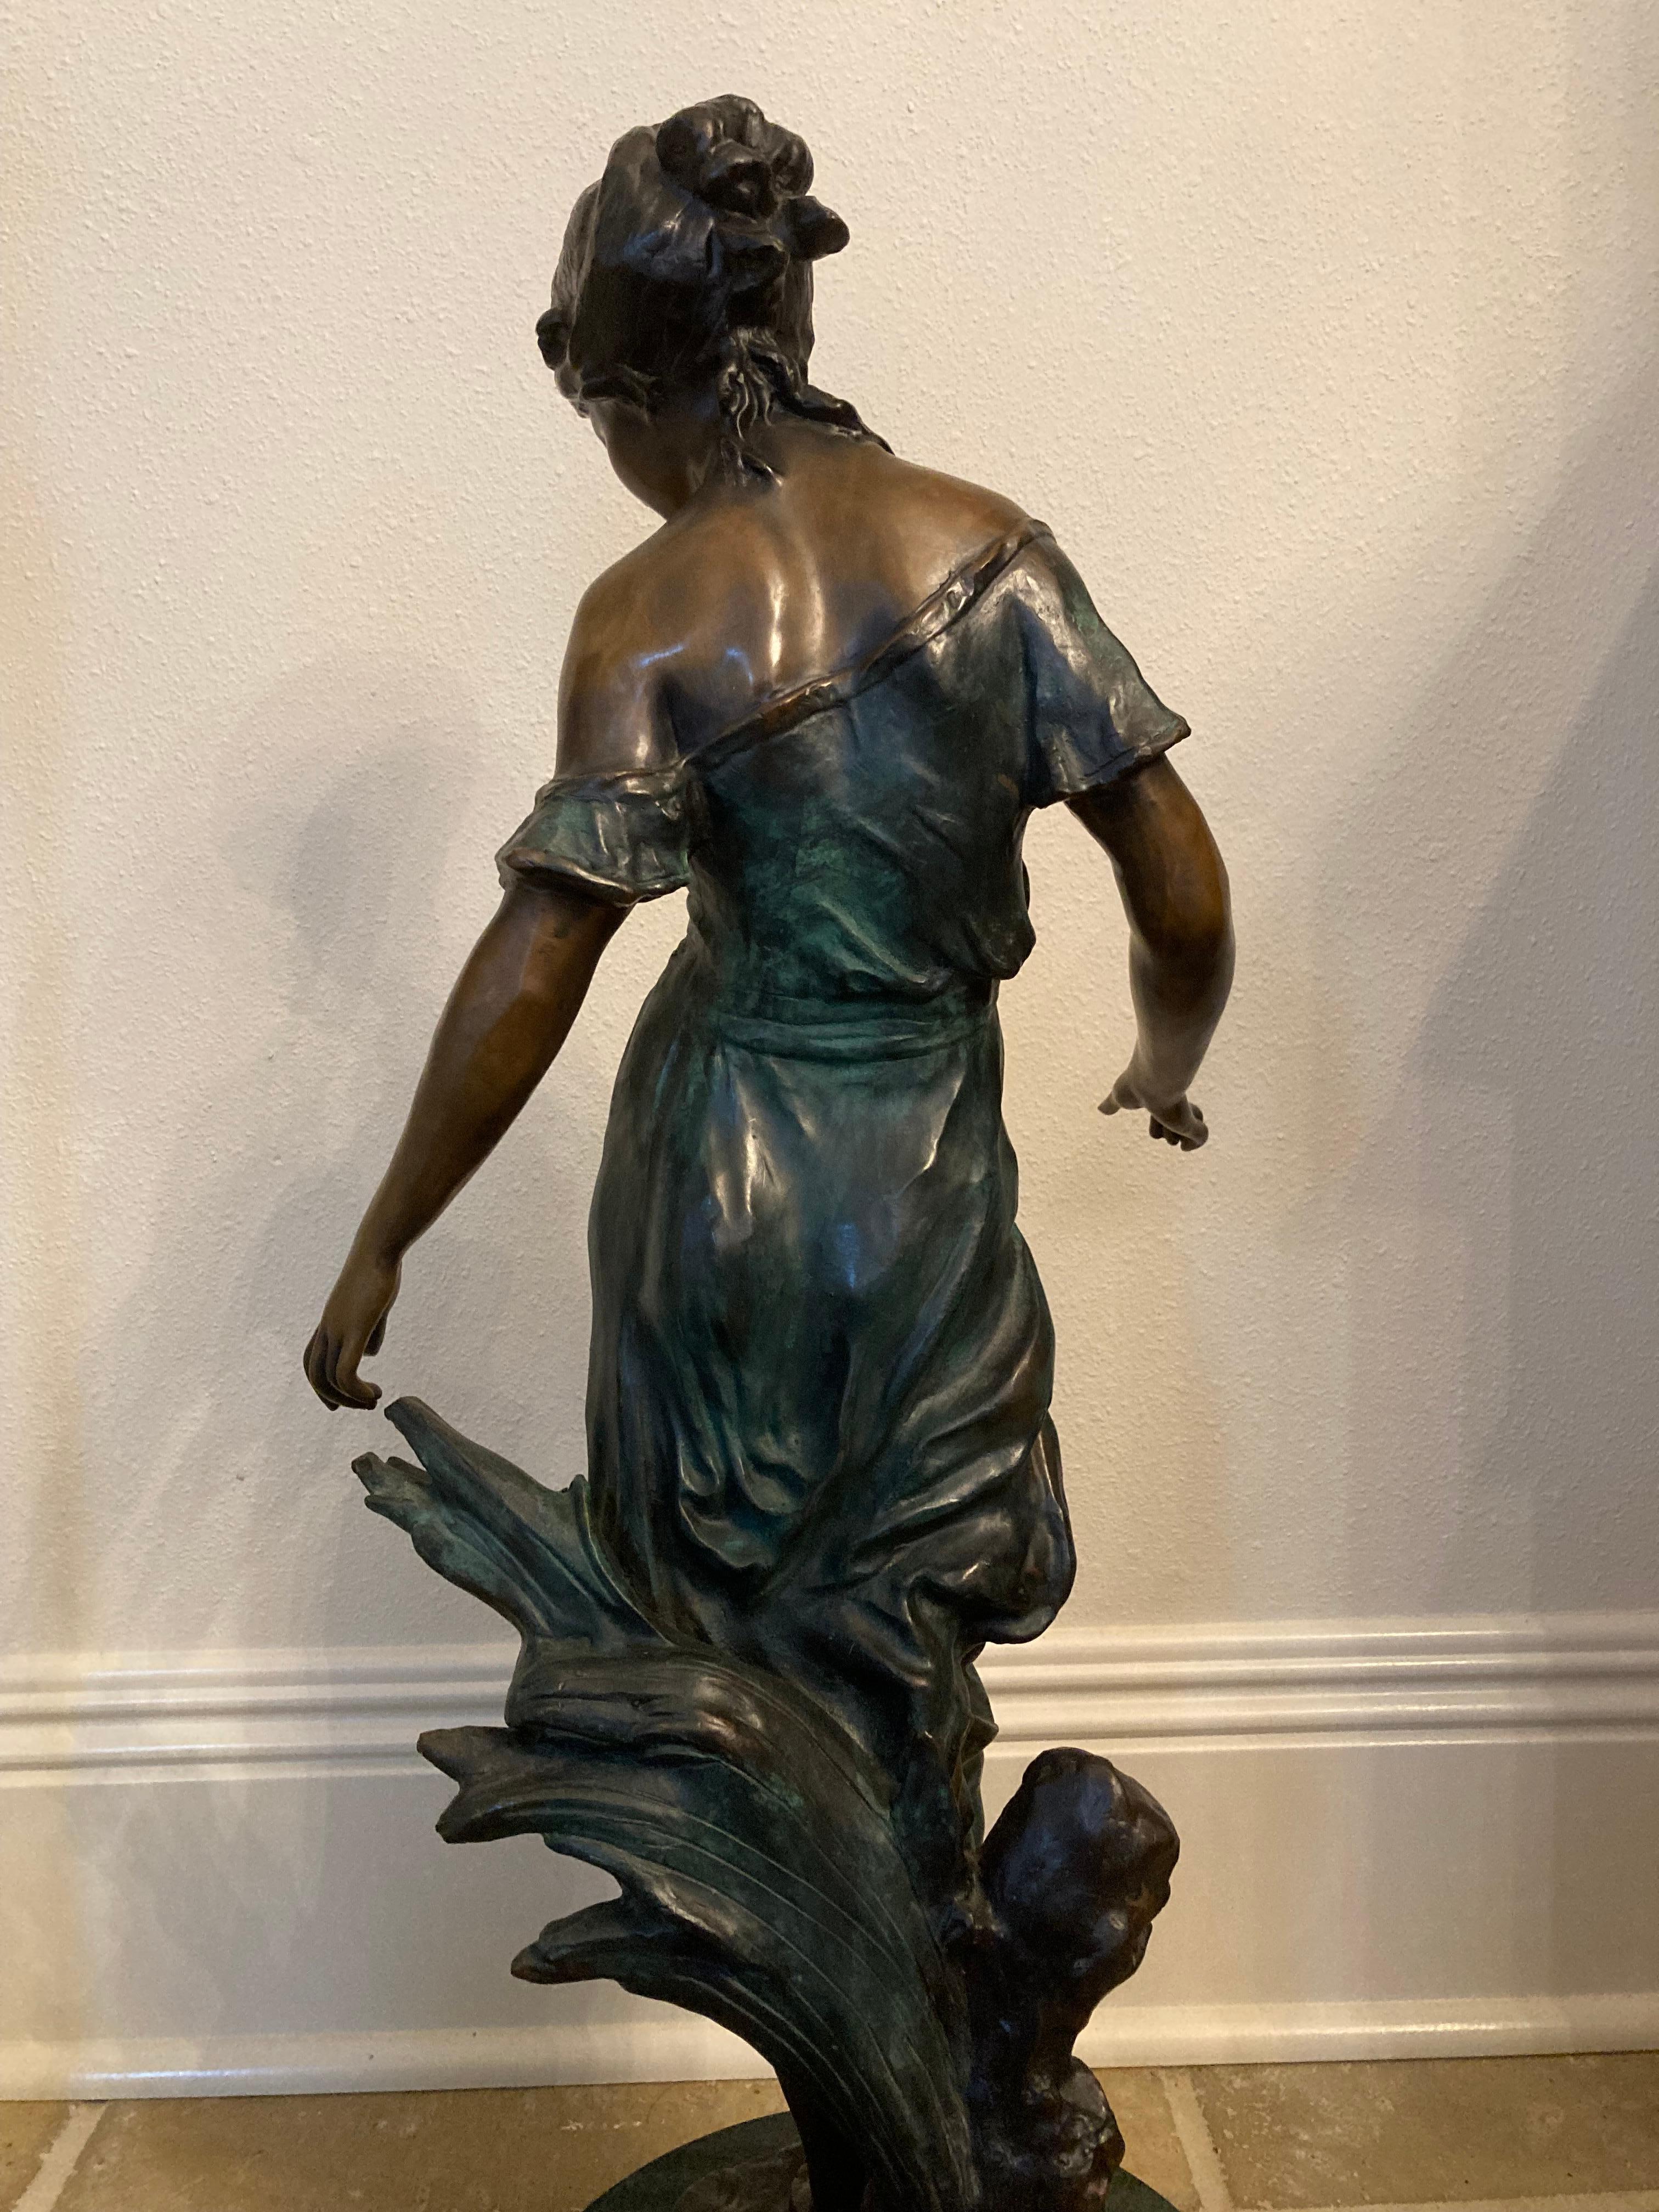 An exquisite bronze by French sculptor Auguste Moreau, a very highly regarded artist who showed regularly in the Paris Salon shows in the early 20th century. He often depicted cherubs, but his most prized bronzes are of lovely young women with